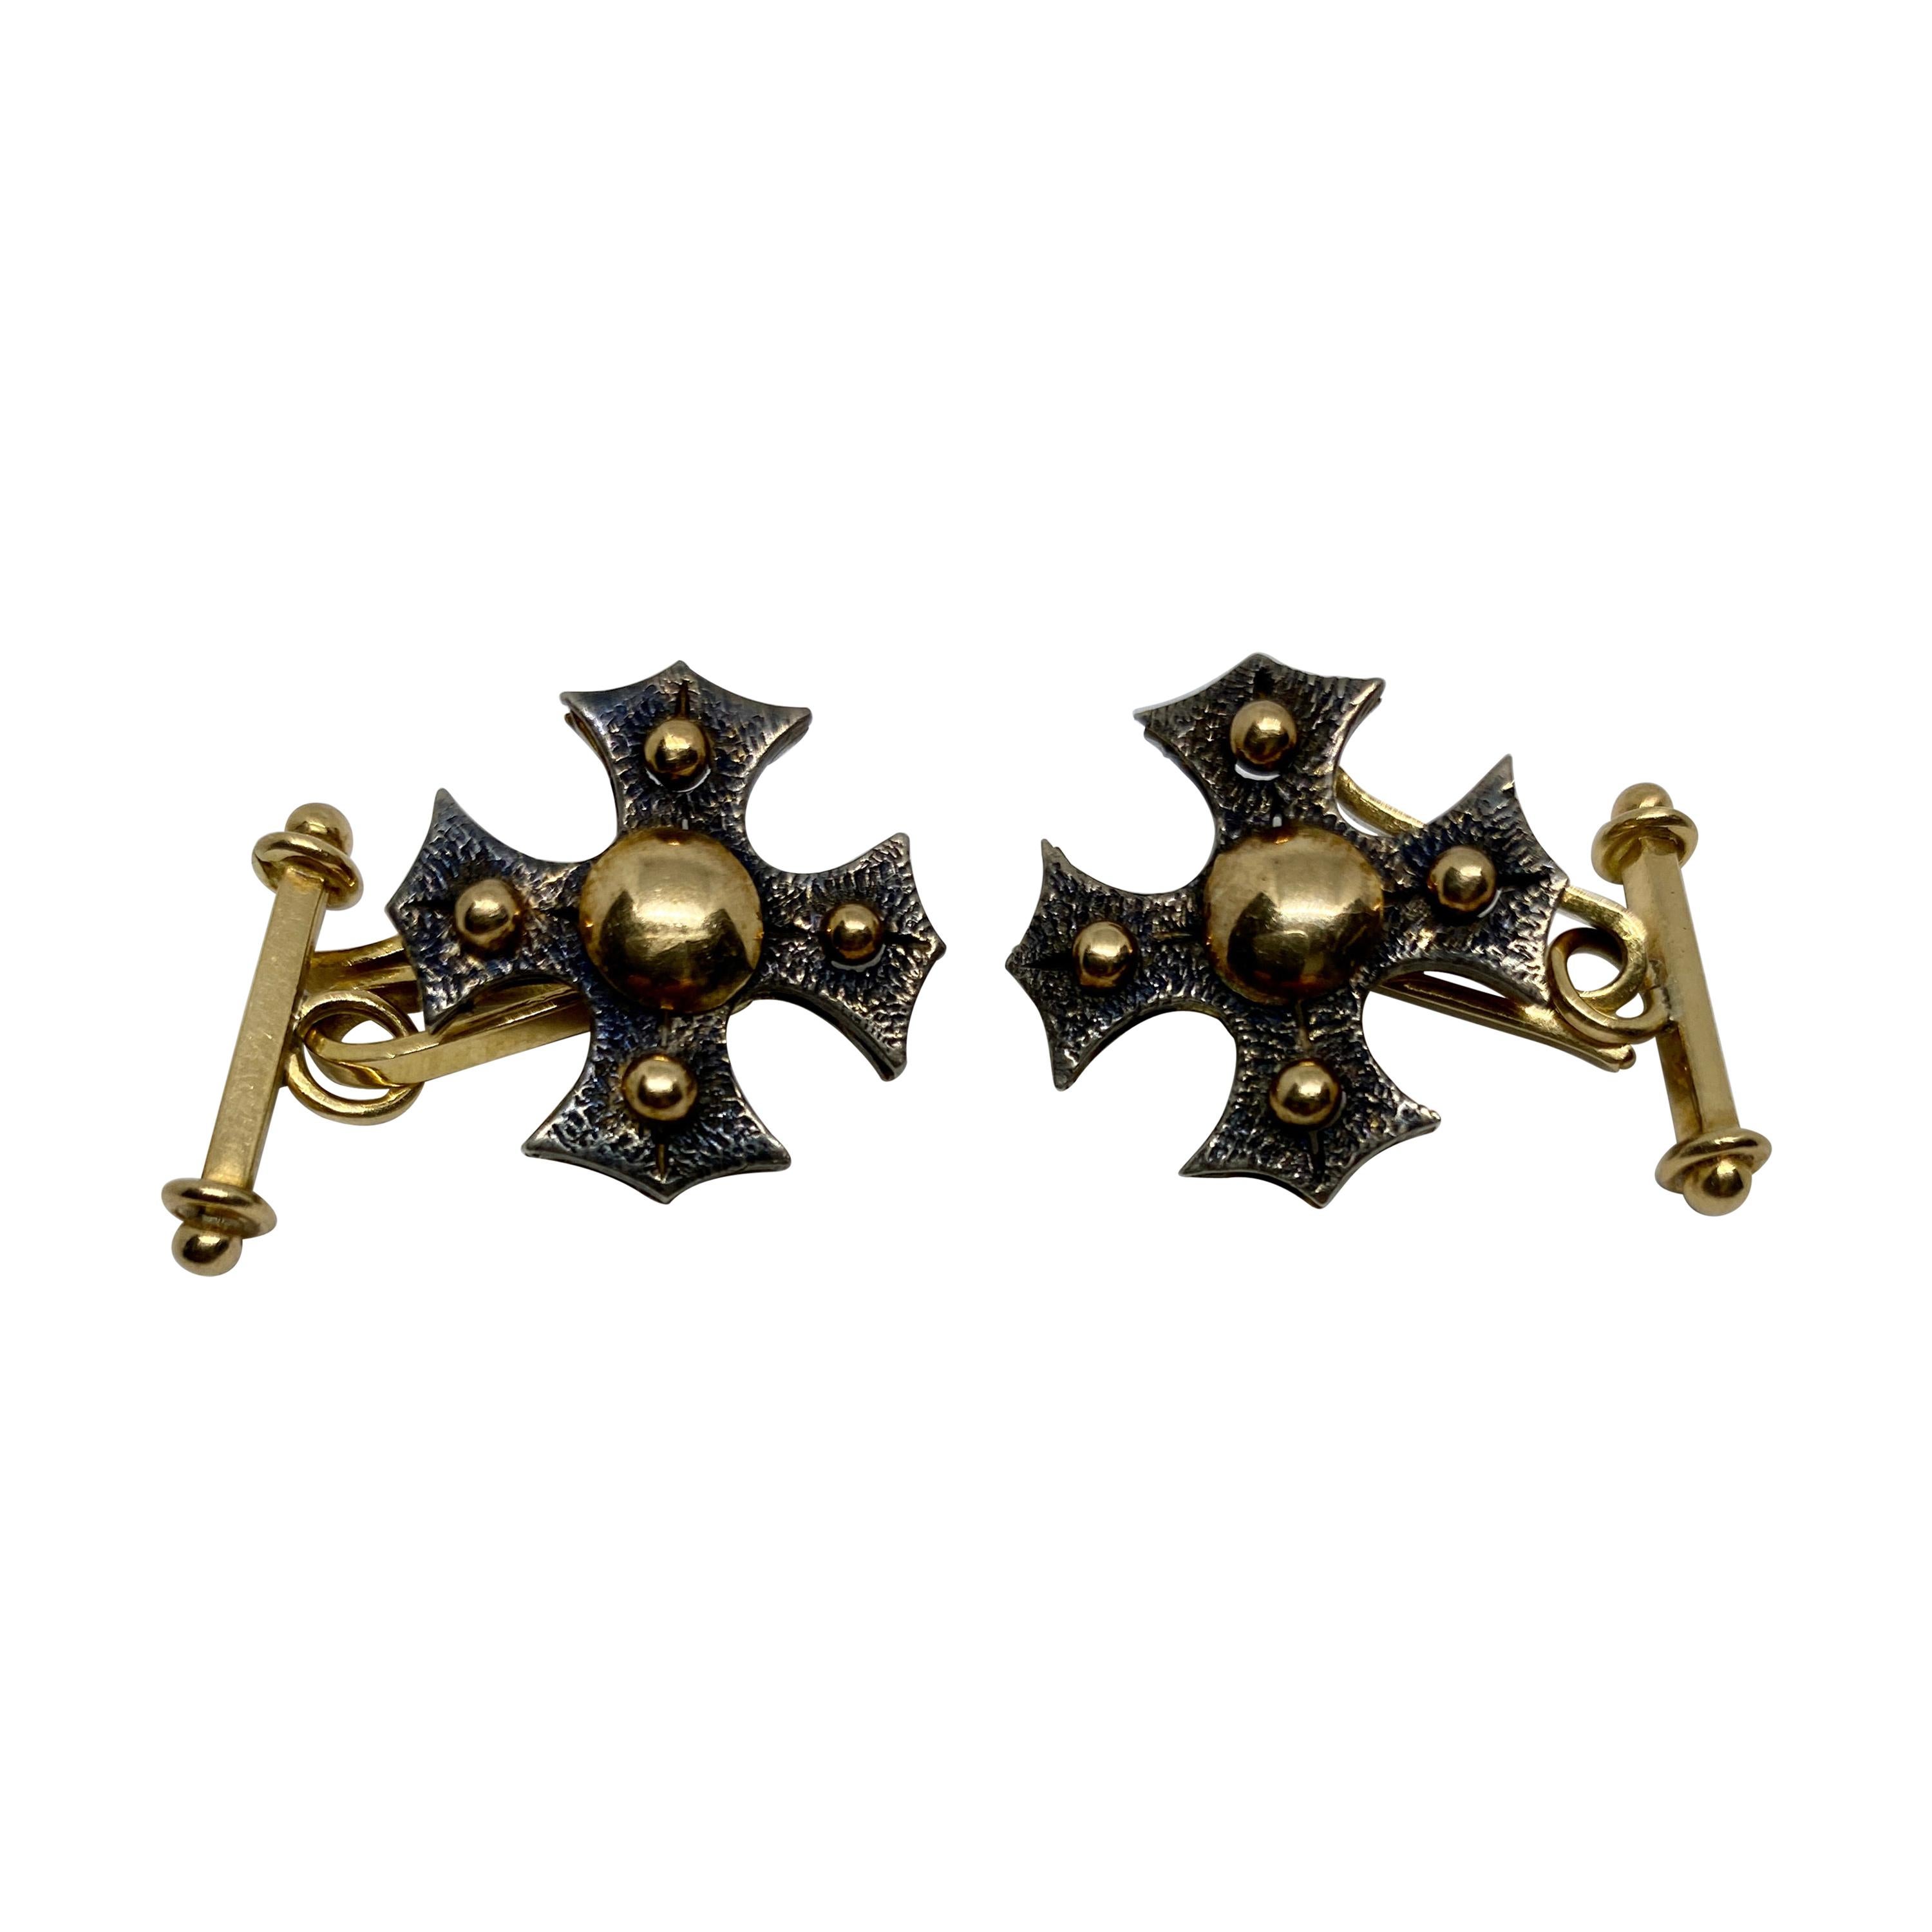 Handmade Cufflinks in 18k Gold with Hammered Silver Details by Ranfagni Firenze For Sale